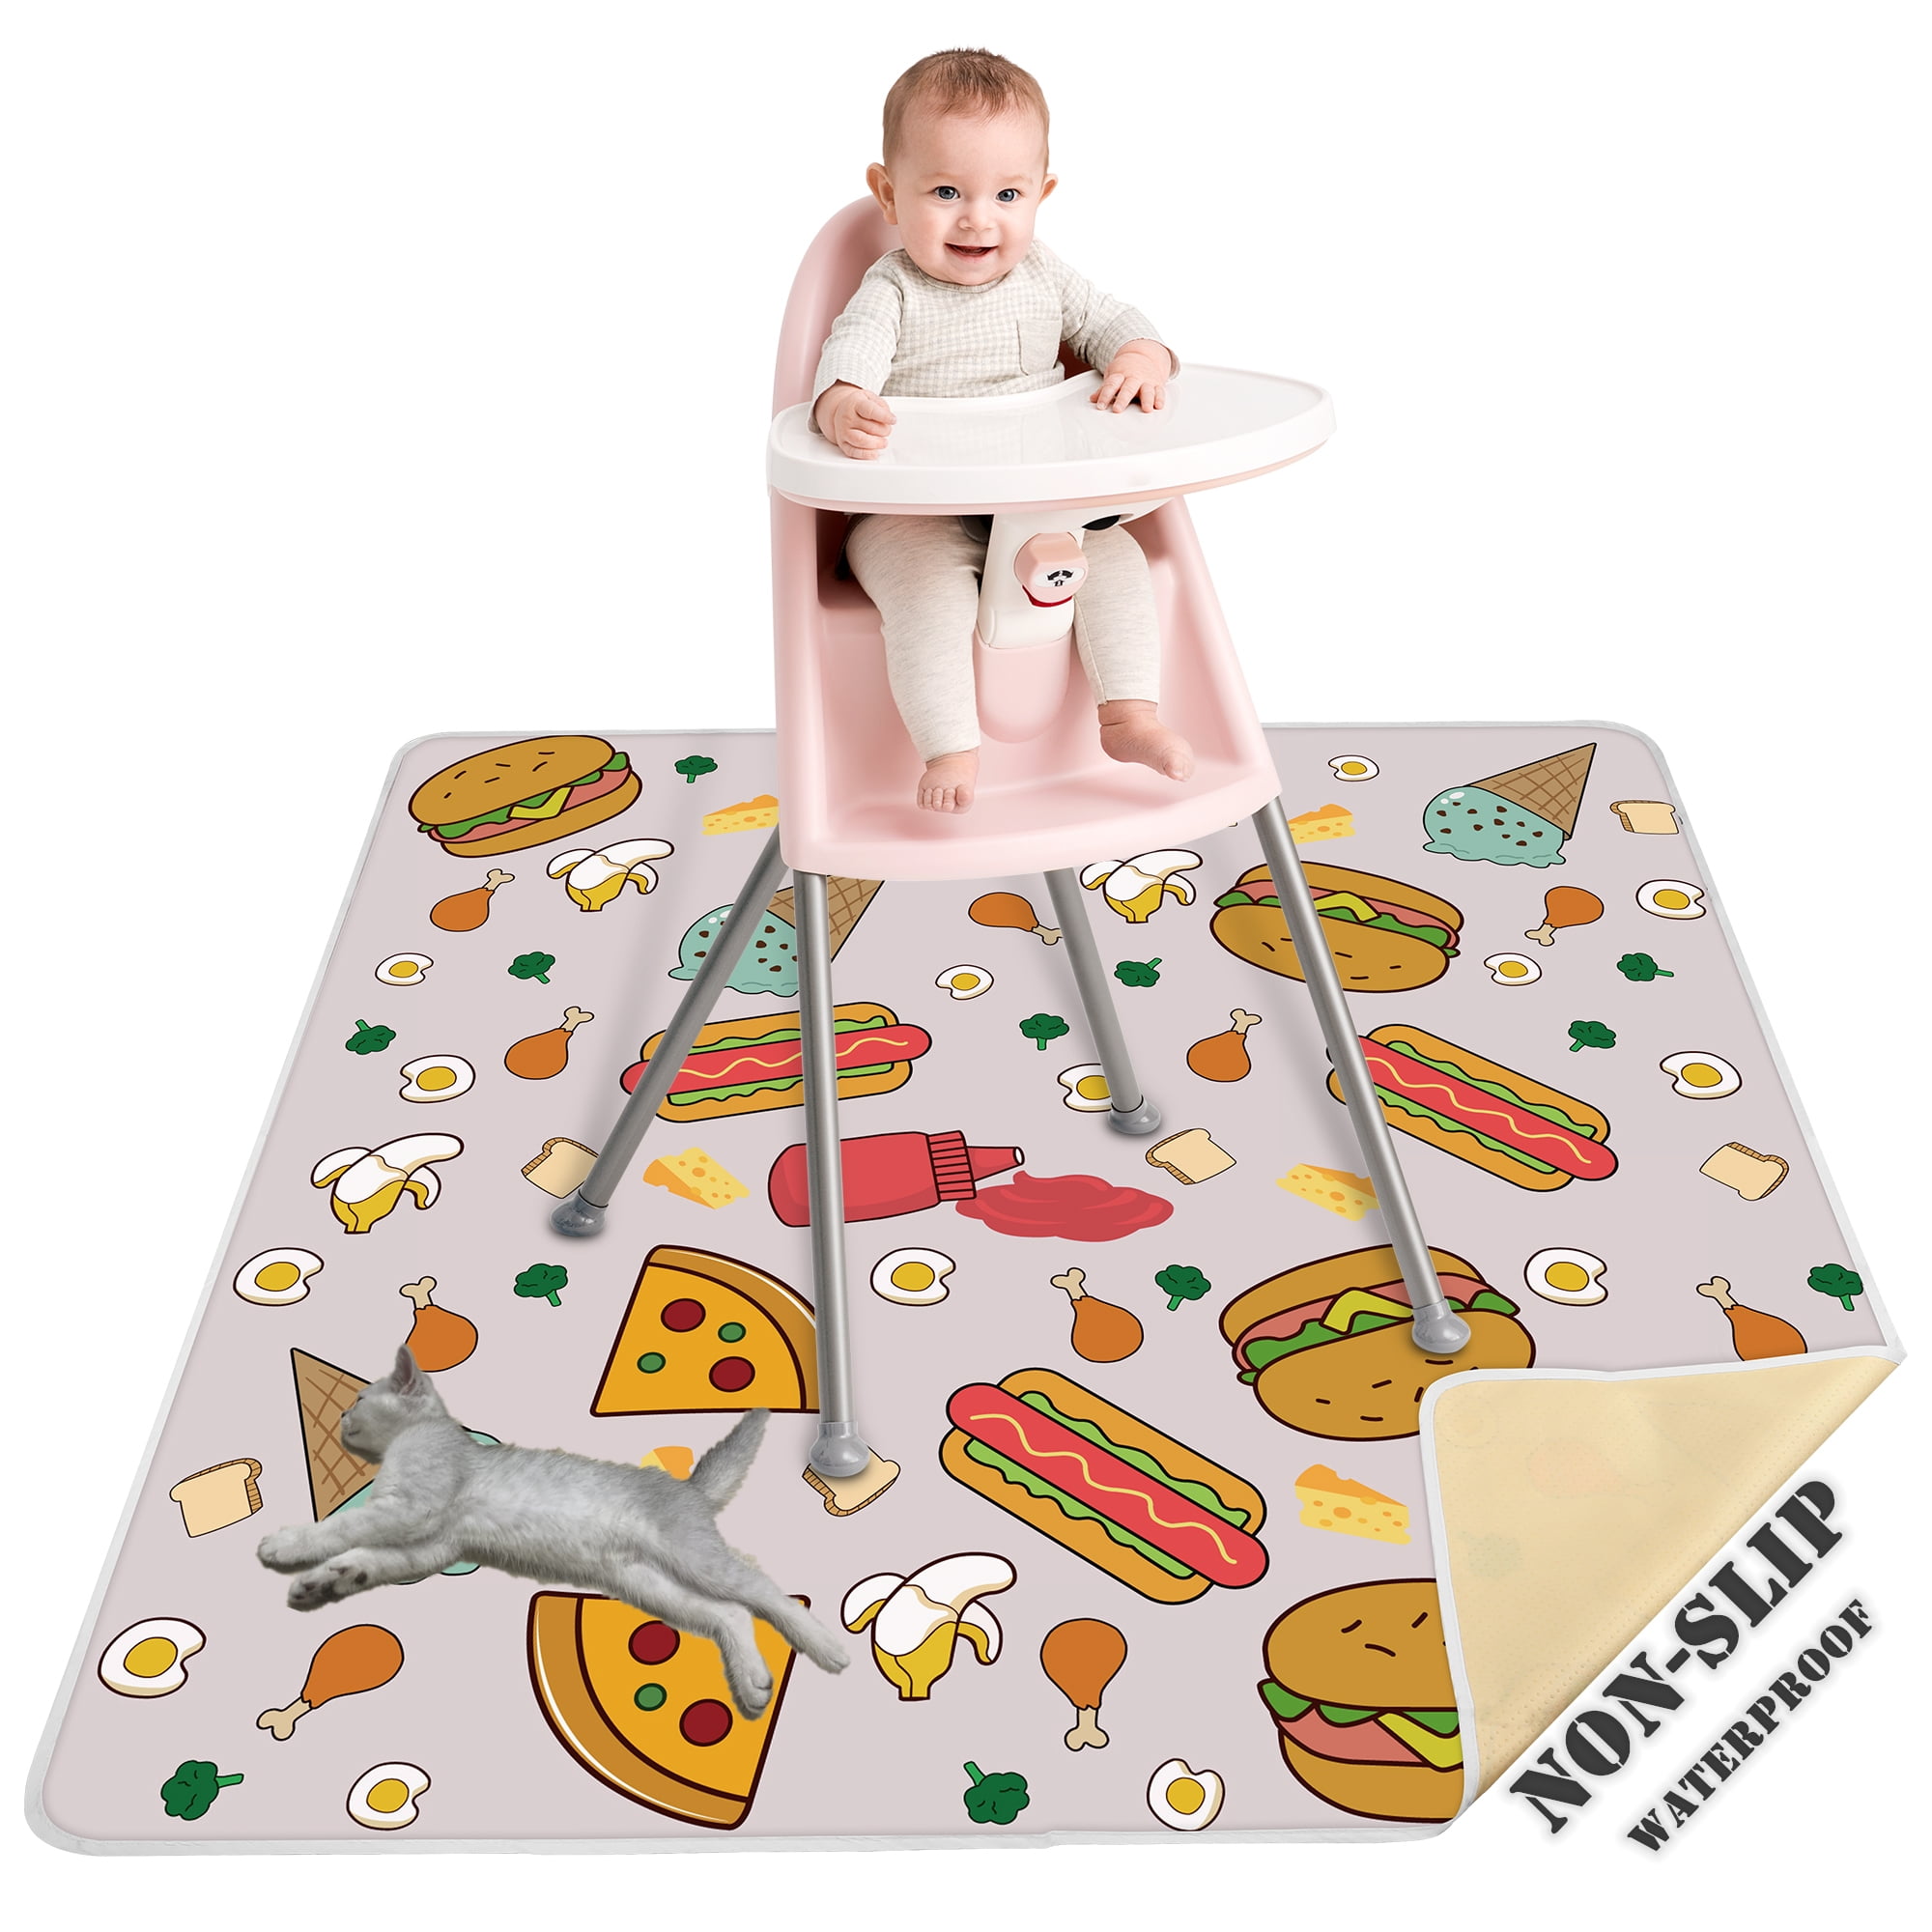 Toddler Booster Seat Splat Mat for Baby High Chair Floor Protector 50 inch 